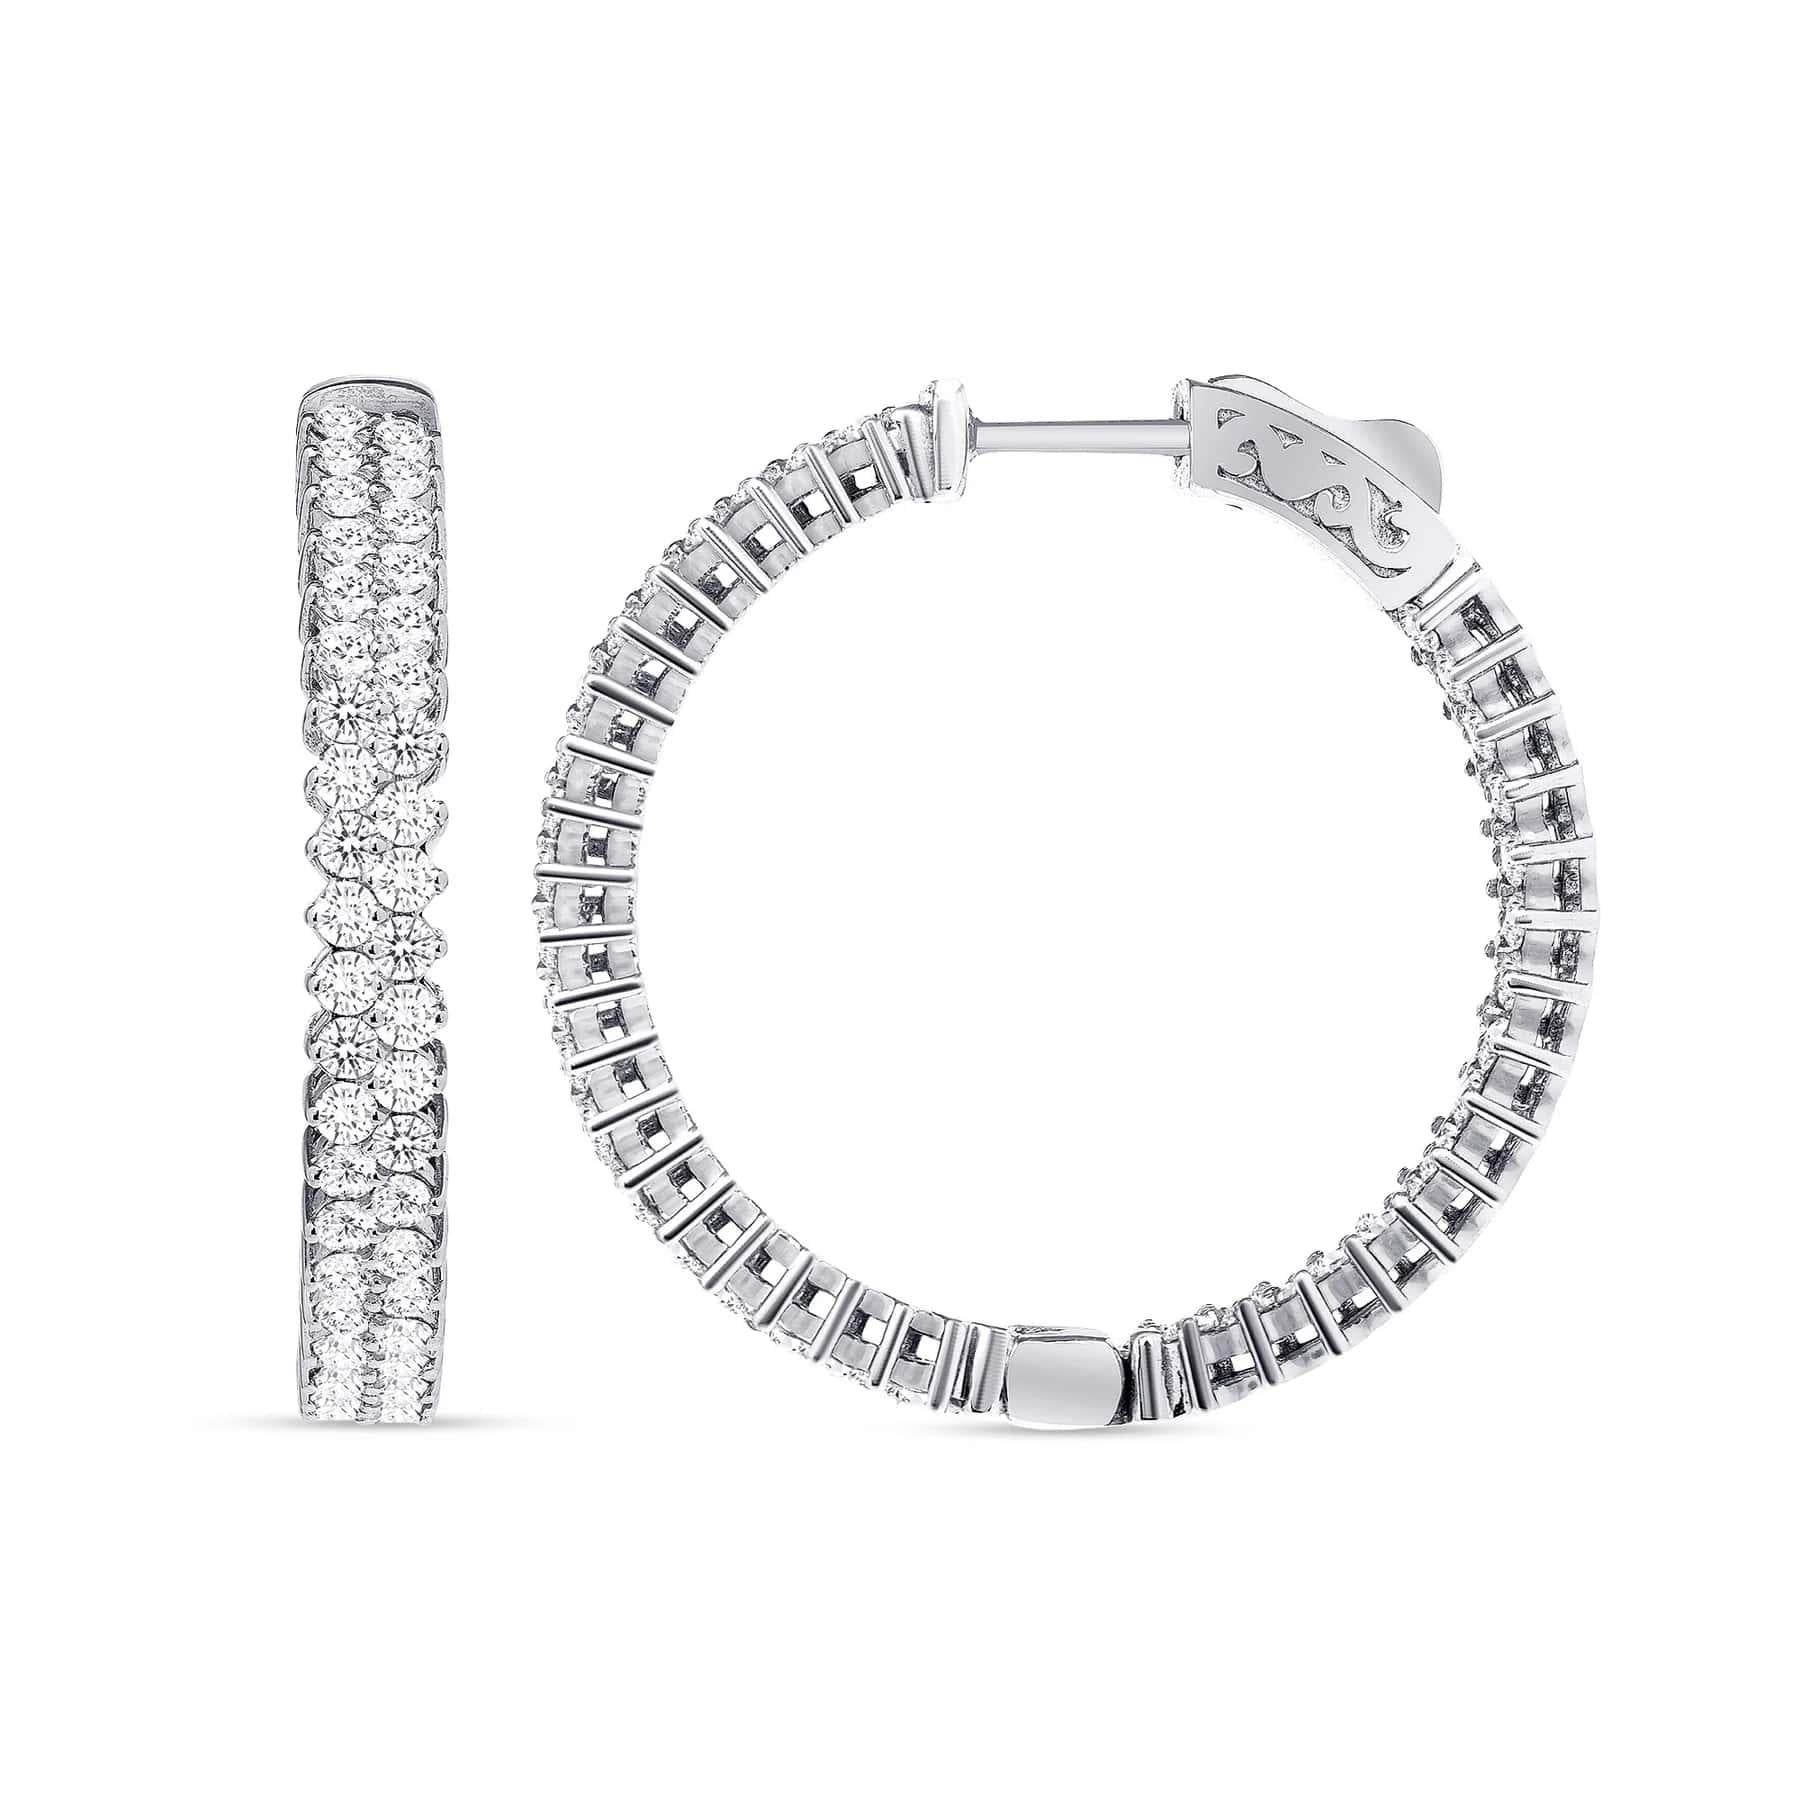 These inside out diamond hoop earrings feature beautiful round diamonds in double row setting in a classic 14k gold setting. An ideal choice as gift for Anniversary, Birthday, Wedding, and Holiday.

Earring Information
Metal : 14k Gold
Metal Color :